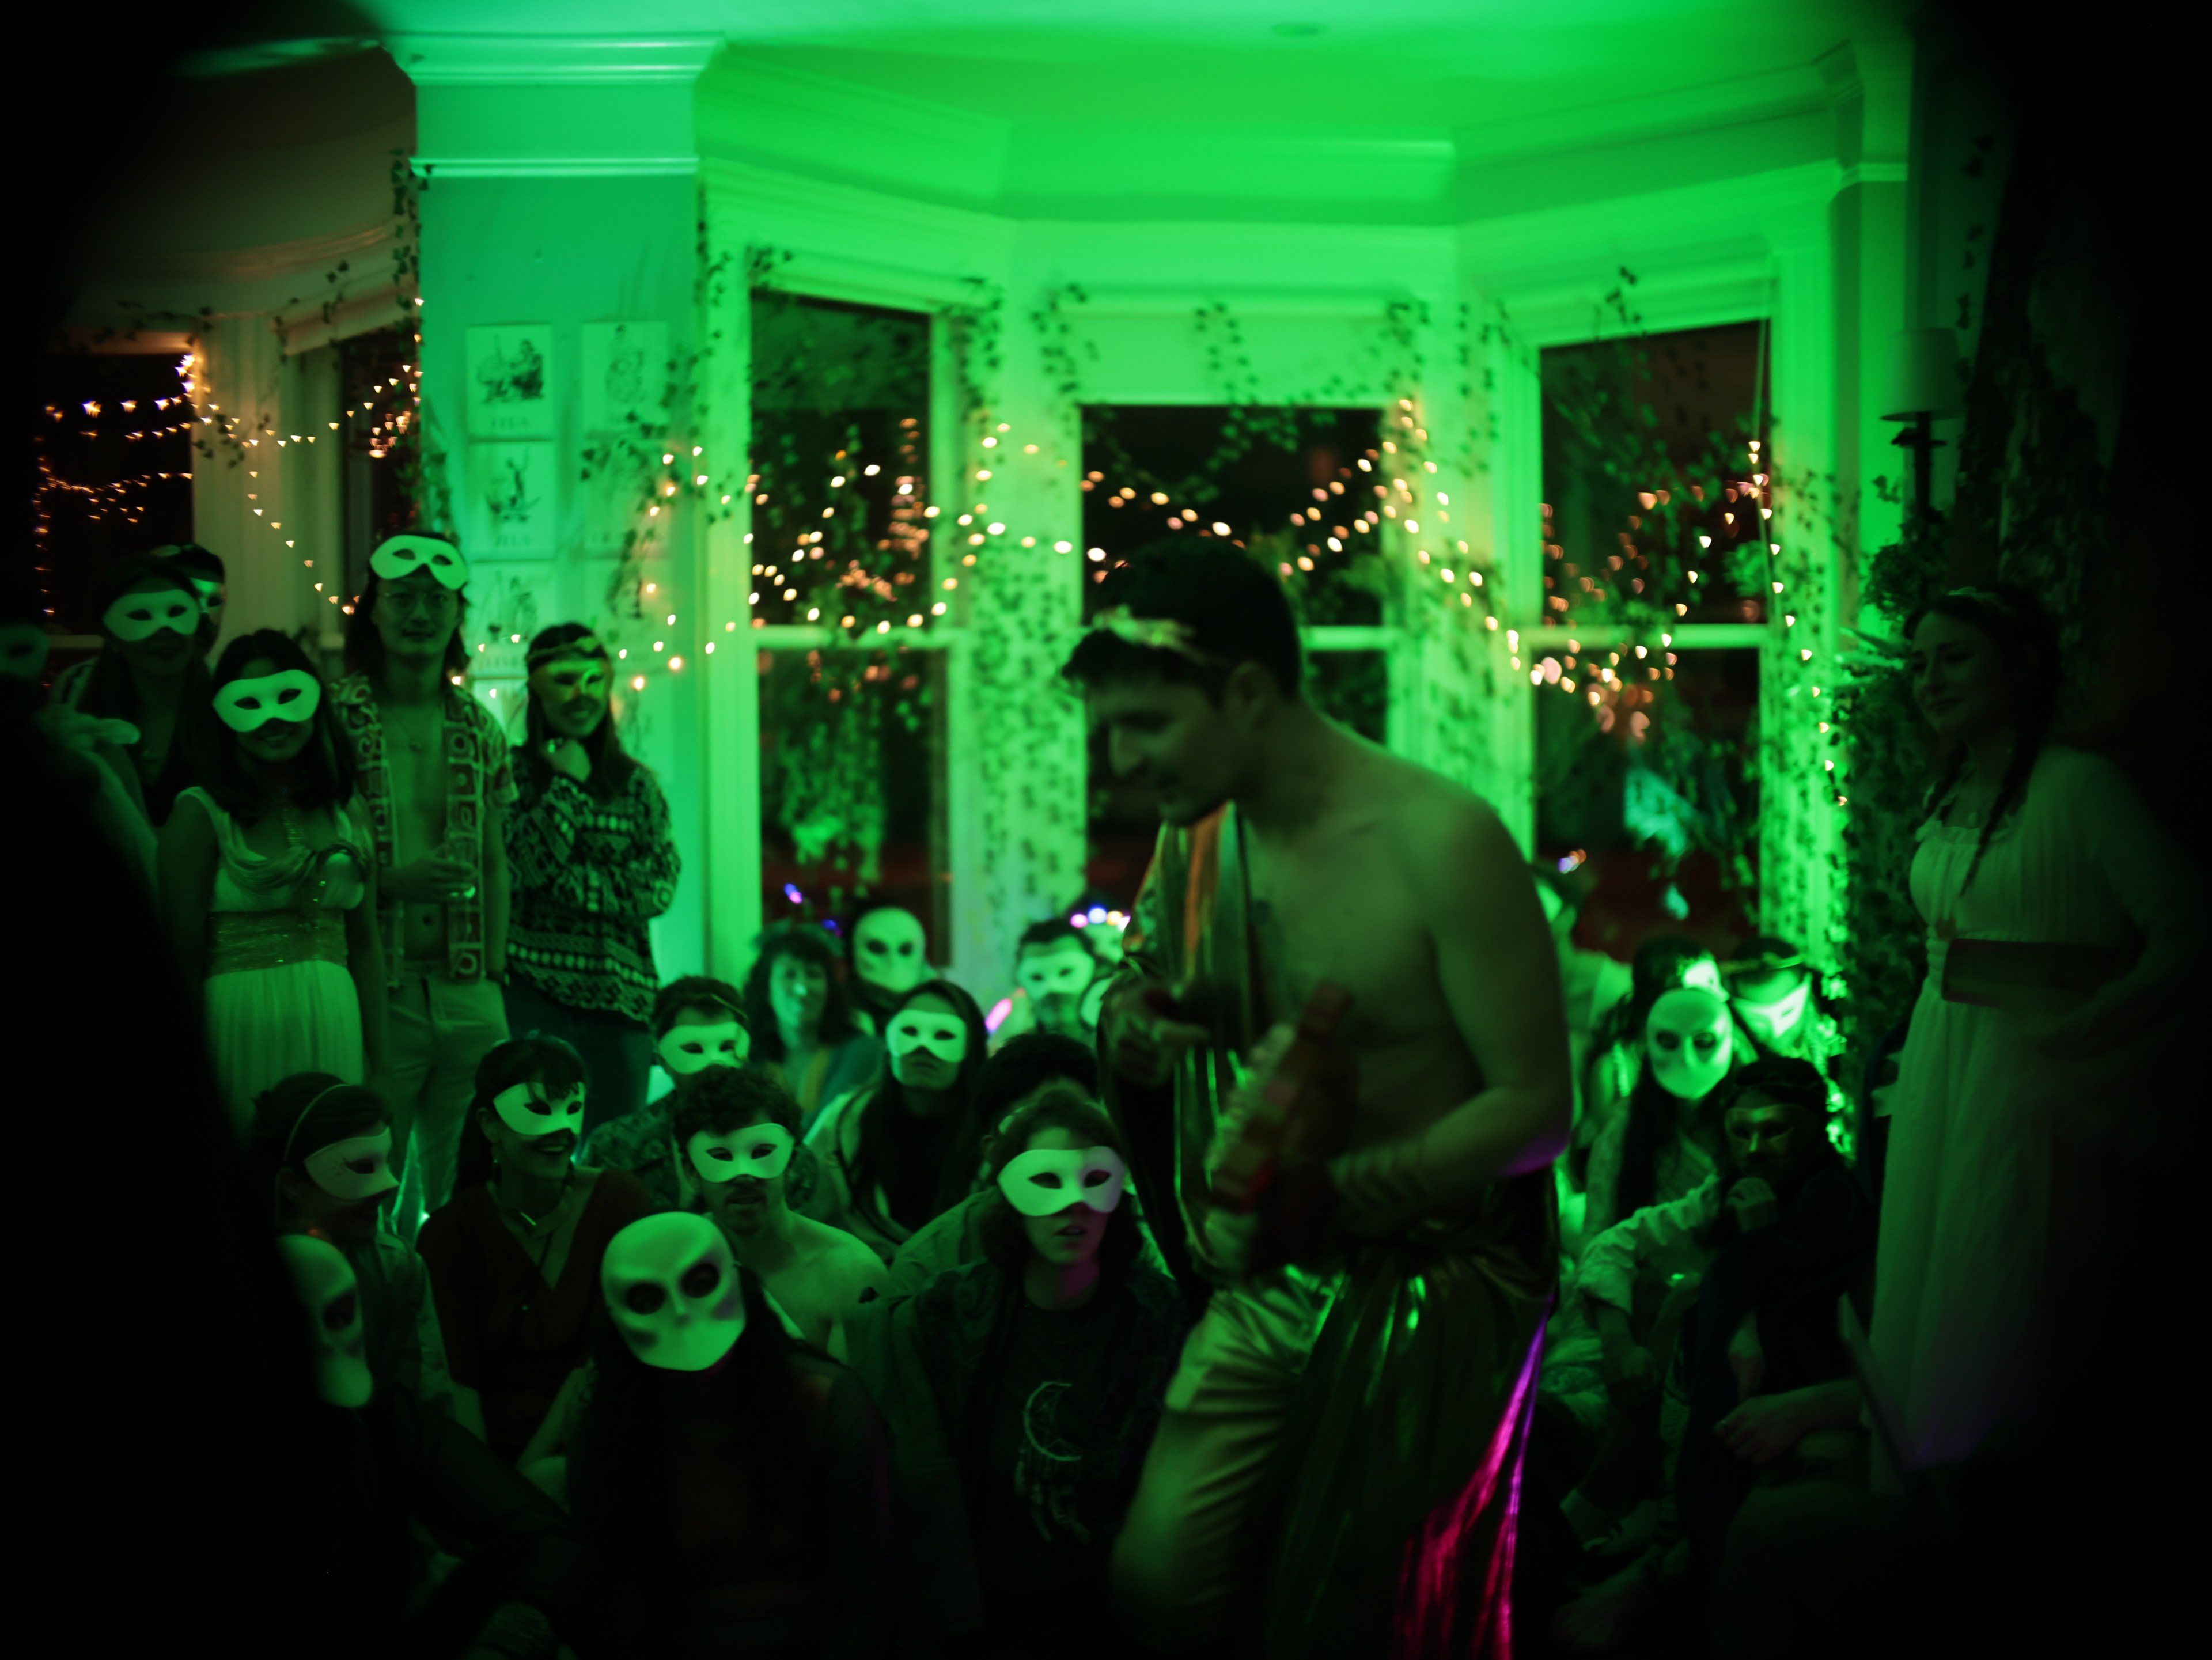 A dimly lit room with masked people watching a shirtless man in golden pants under greenish lighting with string lights.